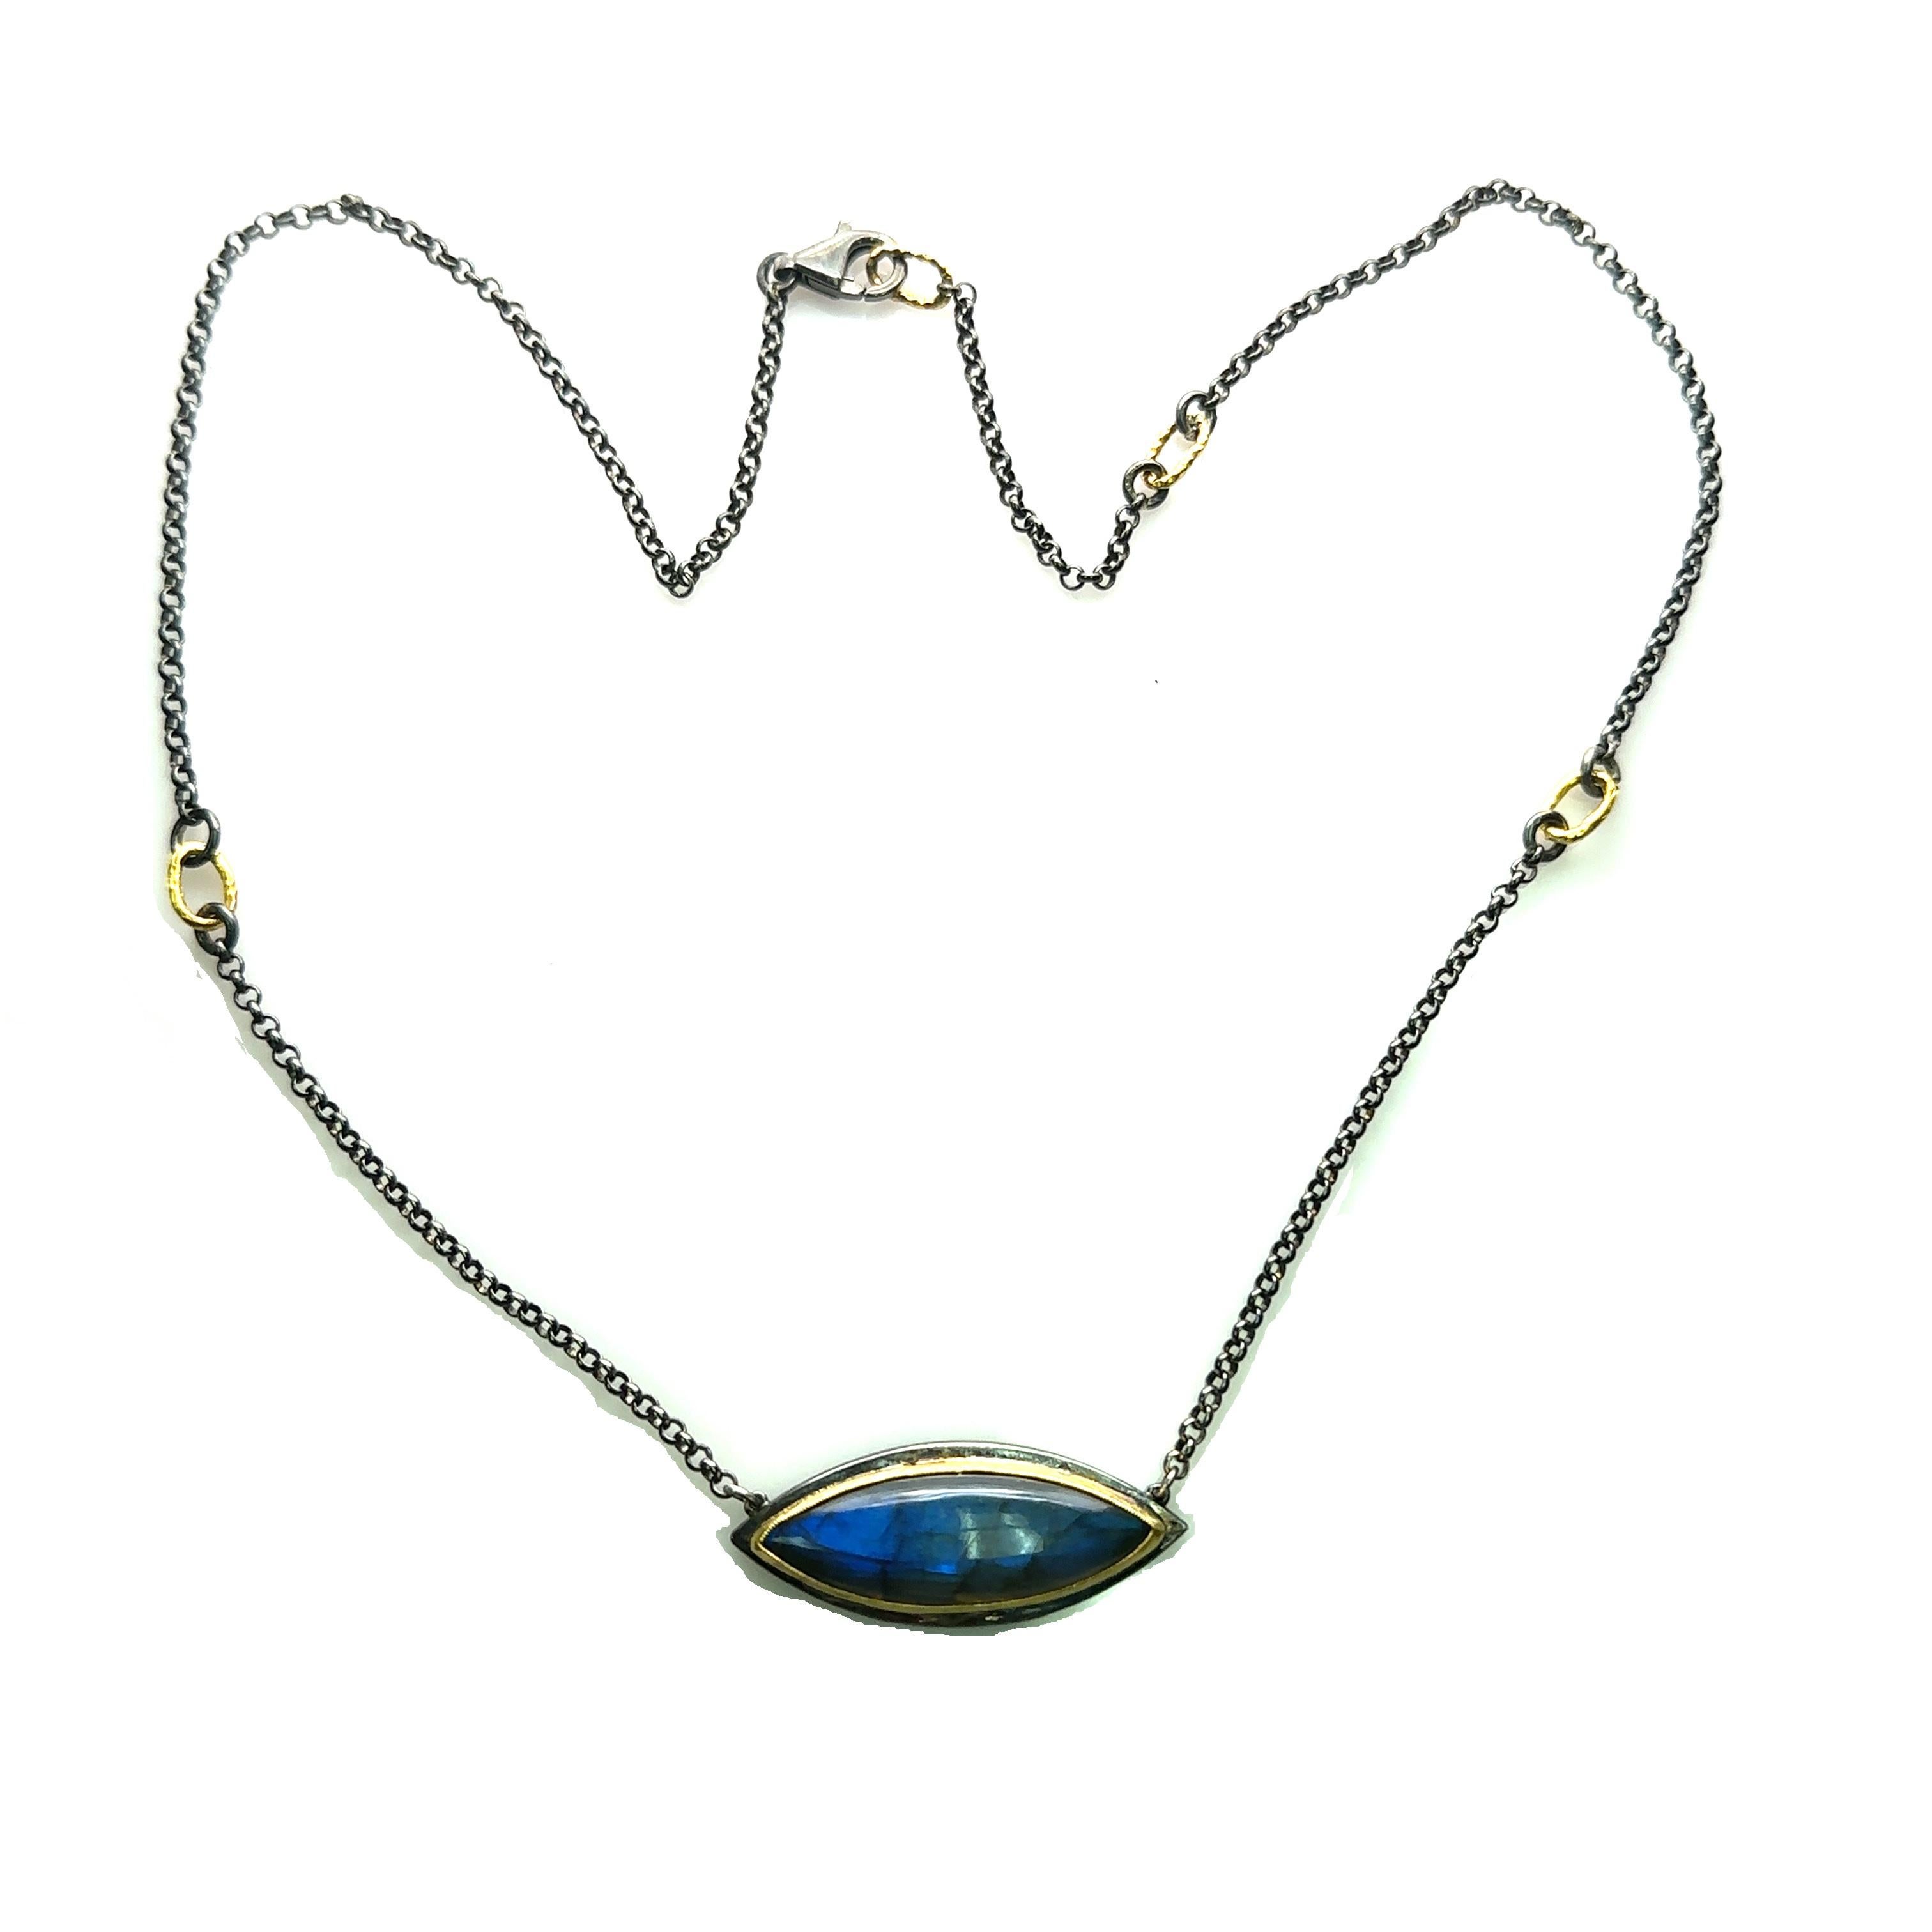 24KT GOLD/SS 18” NECKLACE with 30X10MM BLUE LABRADORITE 
Metal: 24K GOLD/OXIDIZED SS
Stone Info: 
30X10MM BLUE LABRADORITE Marquise Shape
Total Stone Weight: 5.00 cwt.
Item Weight:  11.60 gm
Necklace Size: 16+2 =18”
Measurements: 33.75mm x 13.25mm
